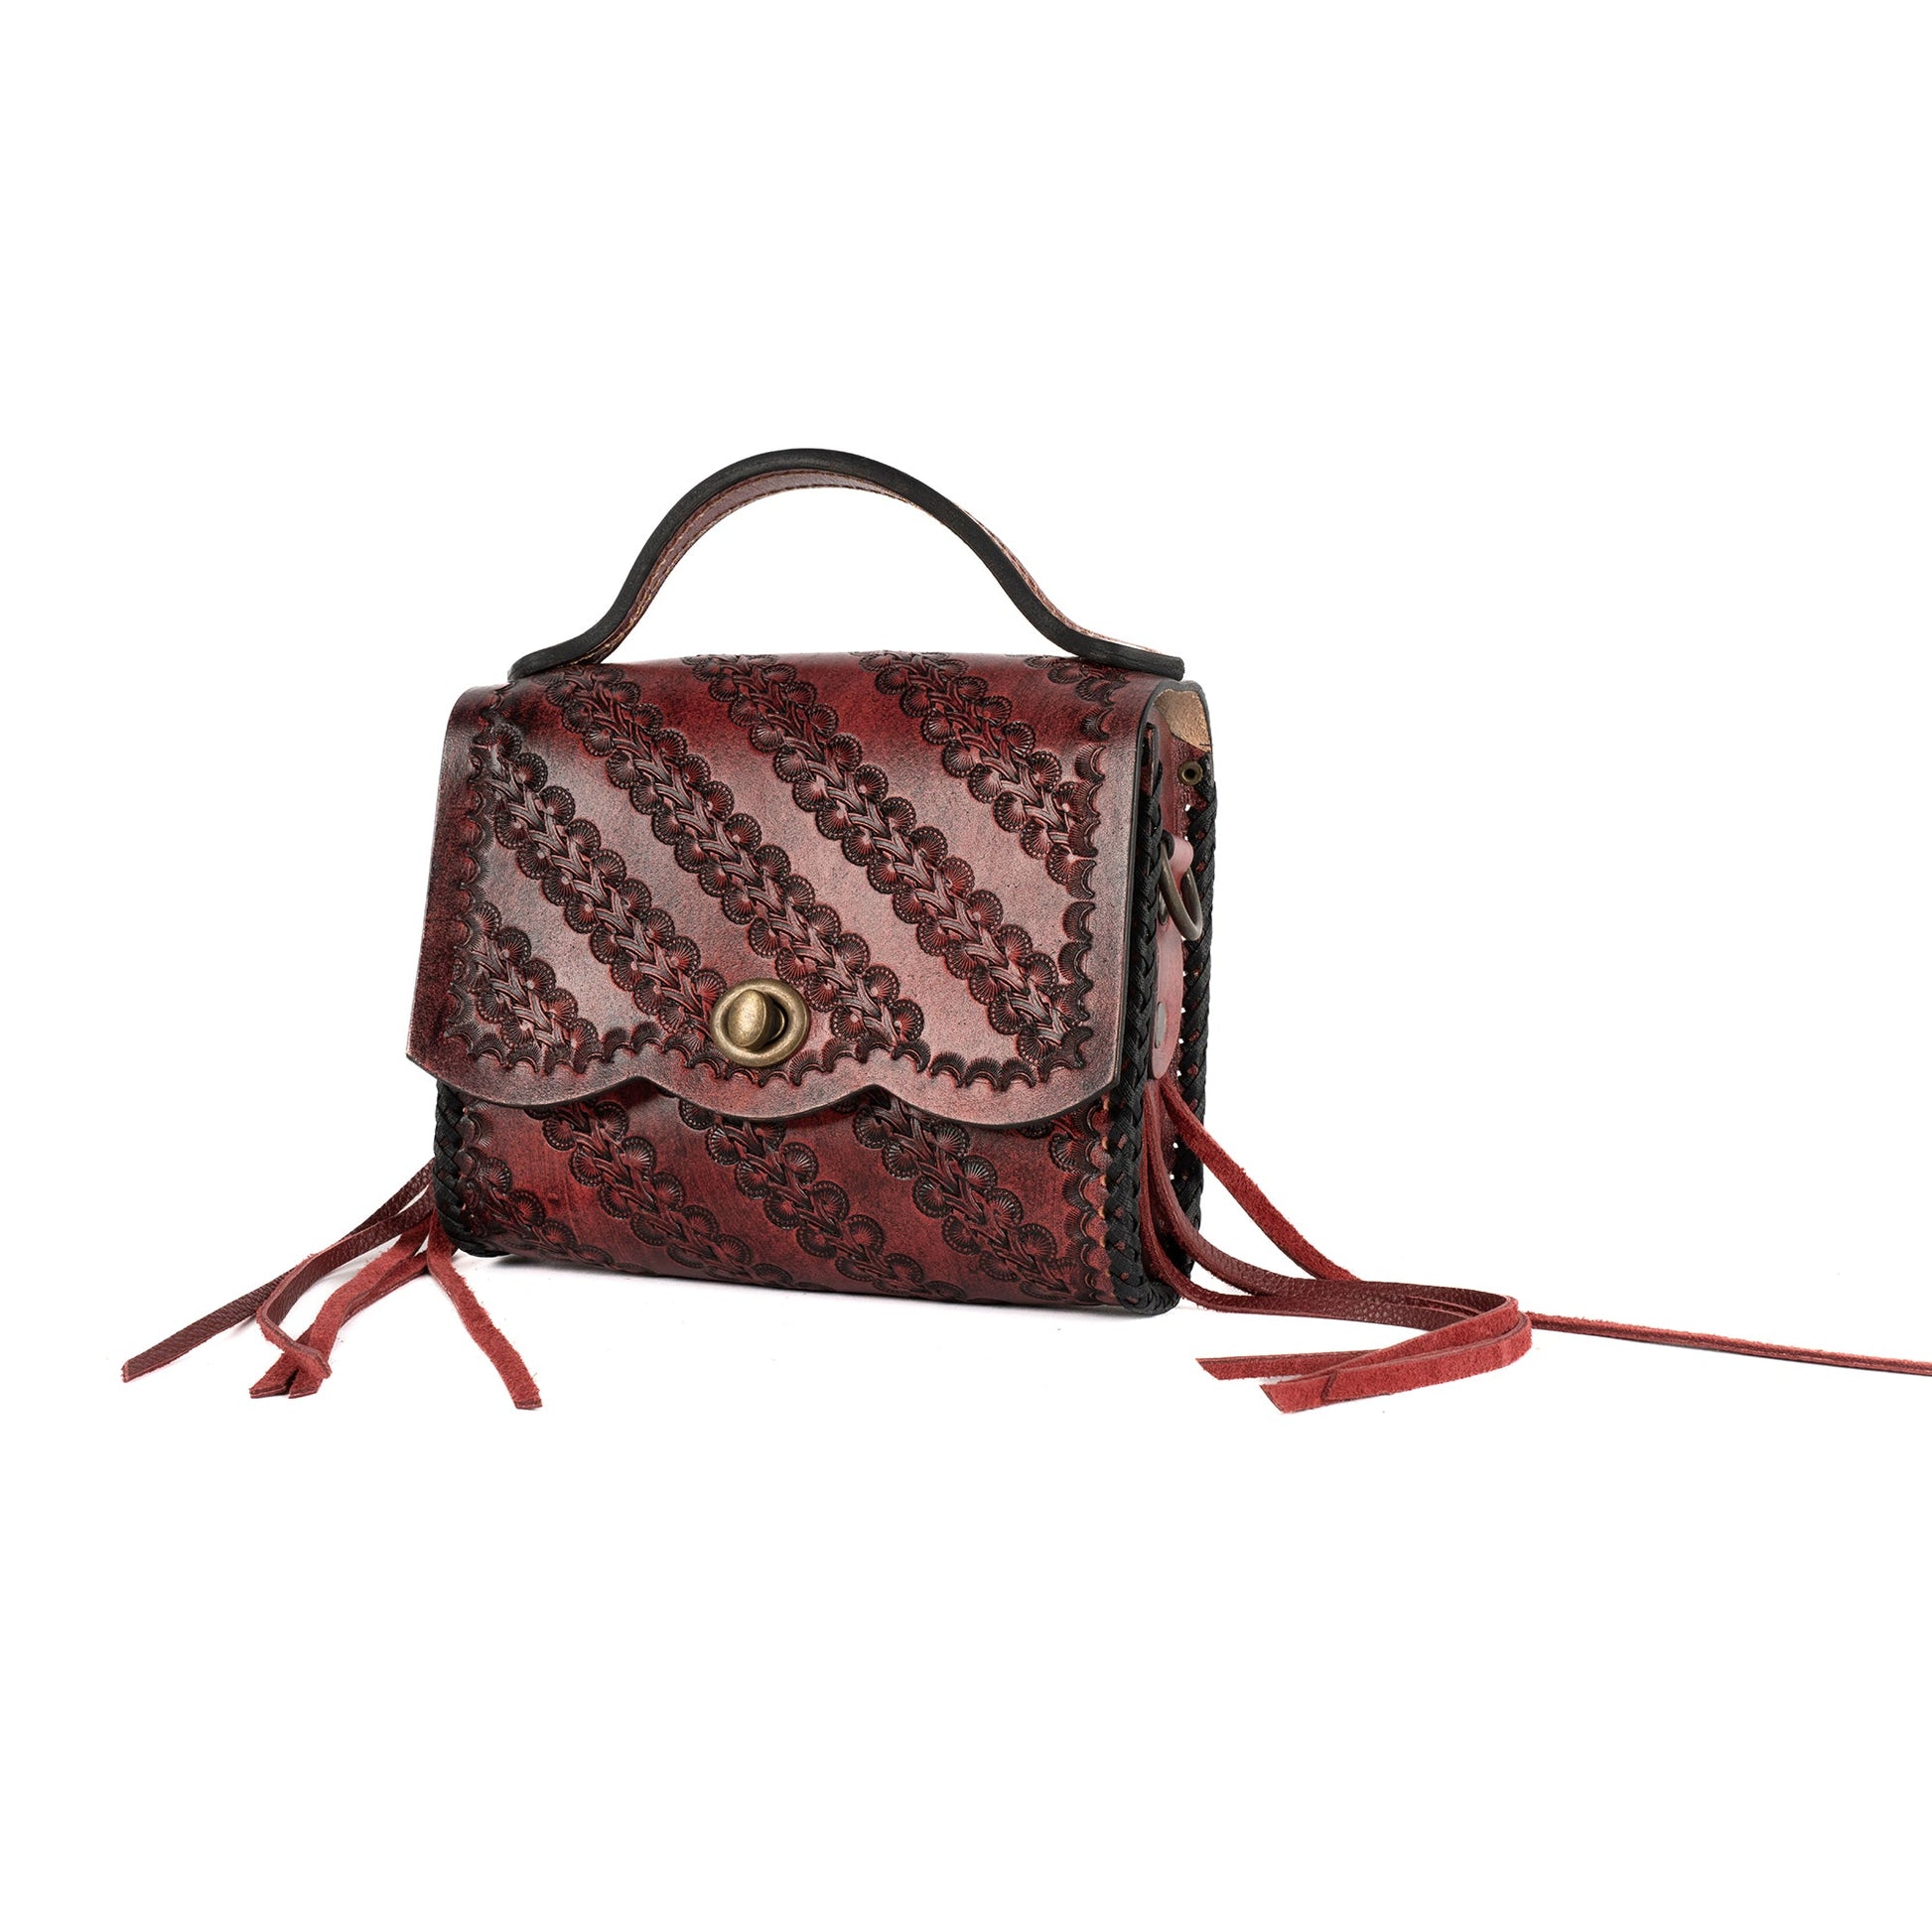 Victoria Red Leather Carved & Crafted Hand Bag - Handbags Zengoda Shop online from Artisan Brands